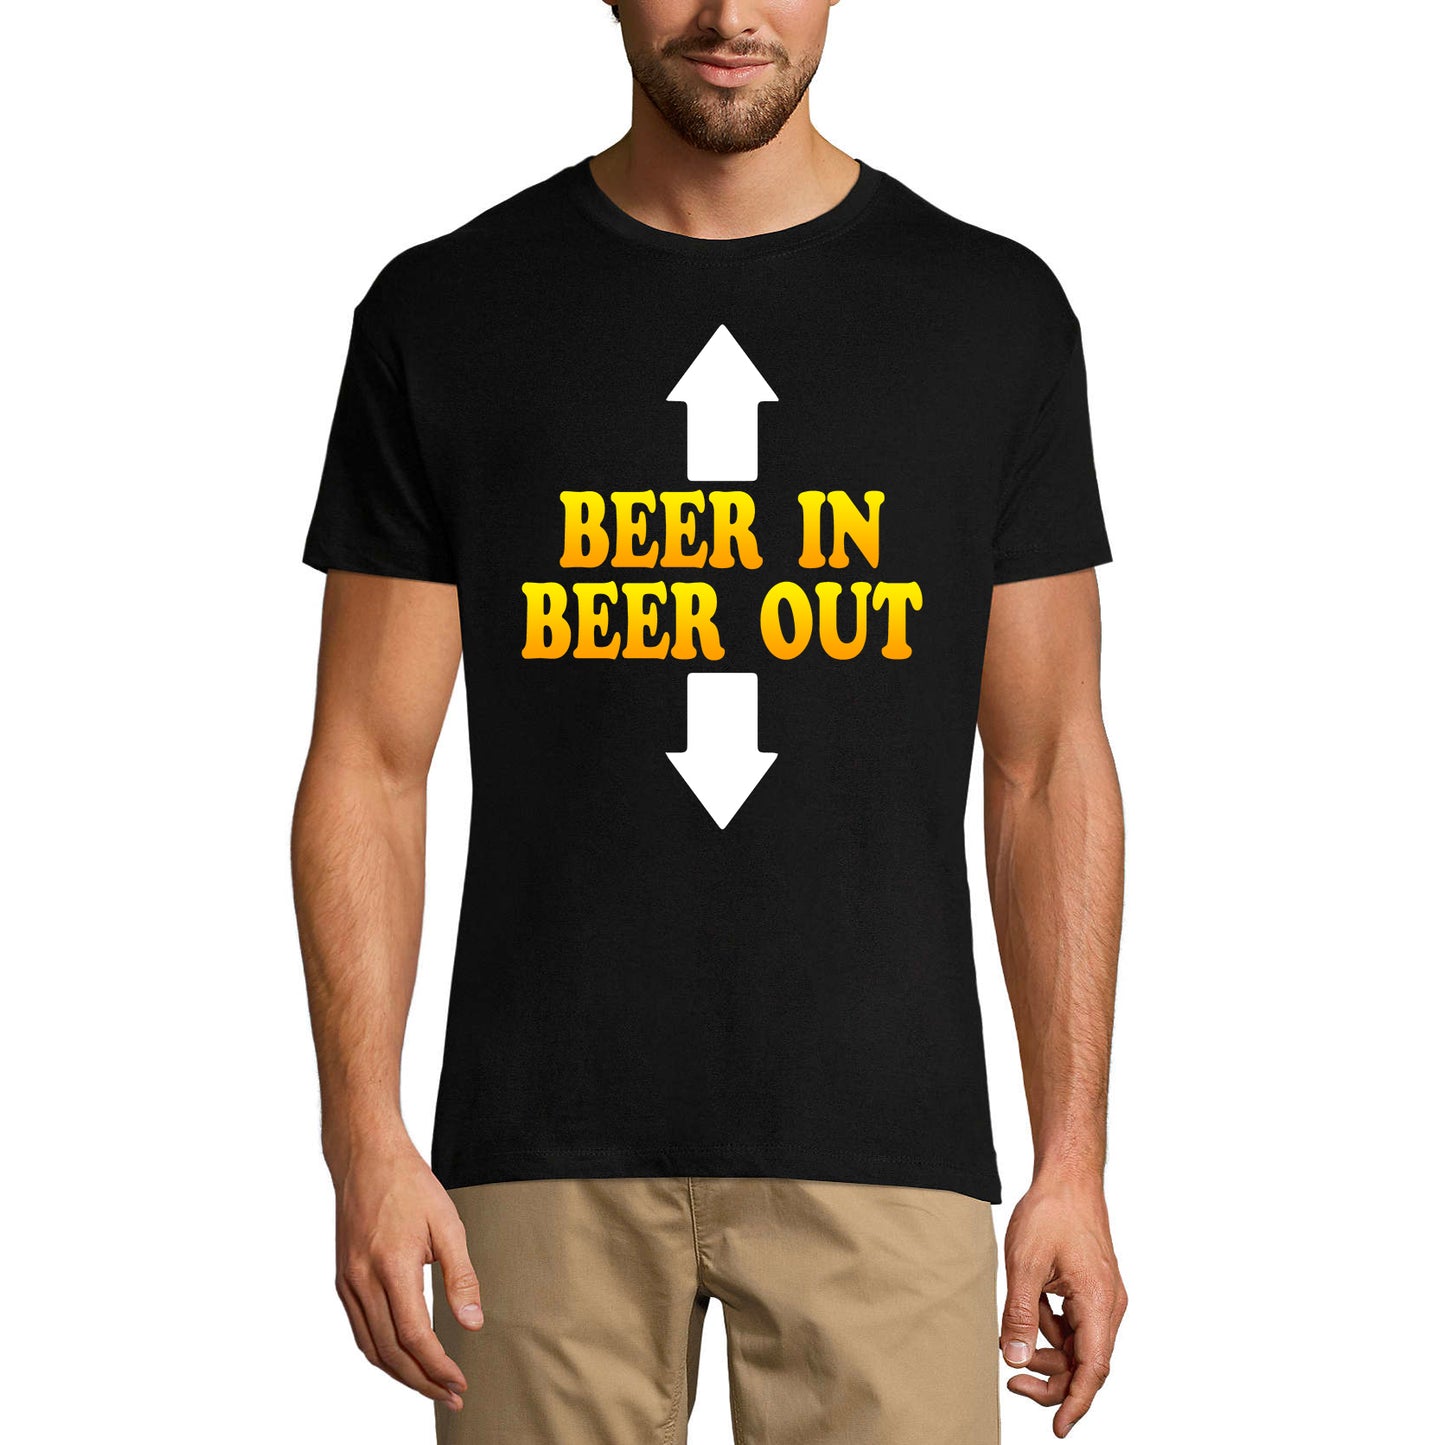 ULTRABASIC Men's Graphic T-Shirt Beer In Beer Out - Funny Alcohol Lover Tee Shirt